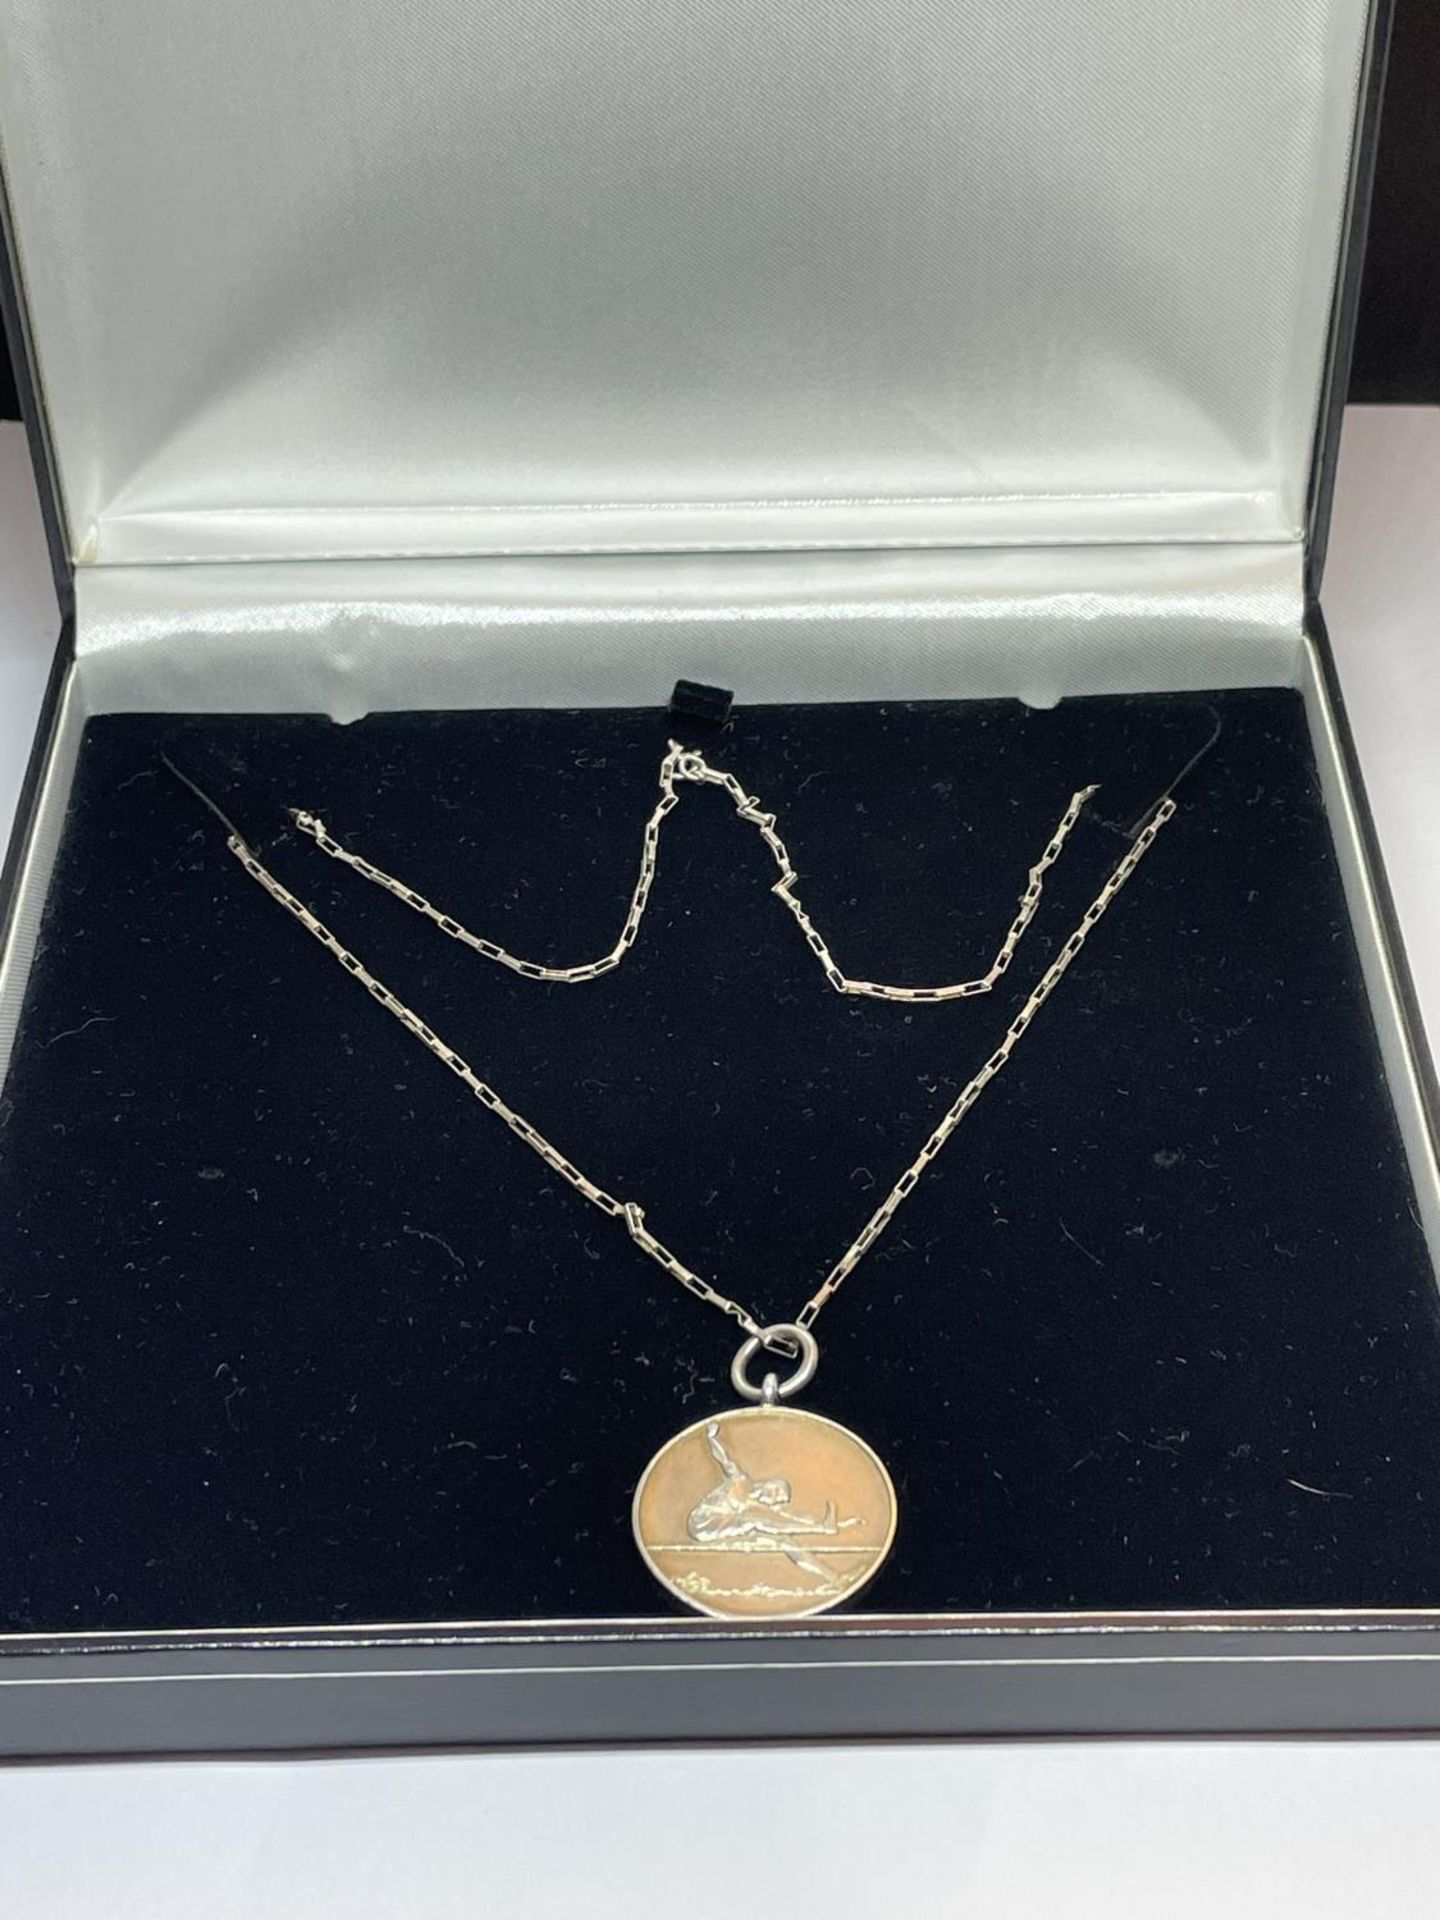 A MARKED SIVER NECKLACE WITH A HALLMARKED BIRMINGHAM SILVER MEDAL IN A PRESENTATION BOX